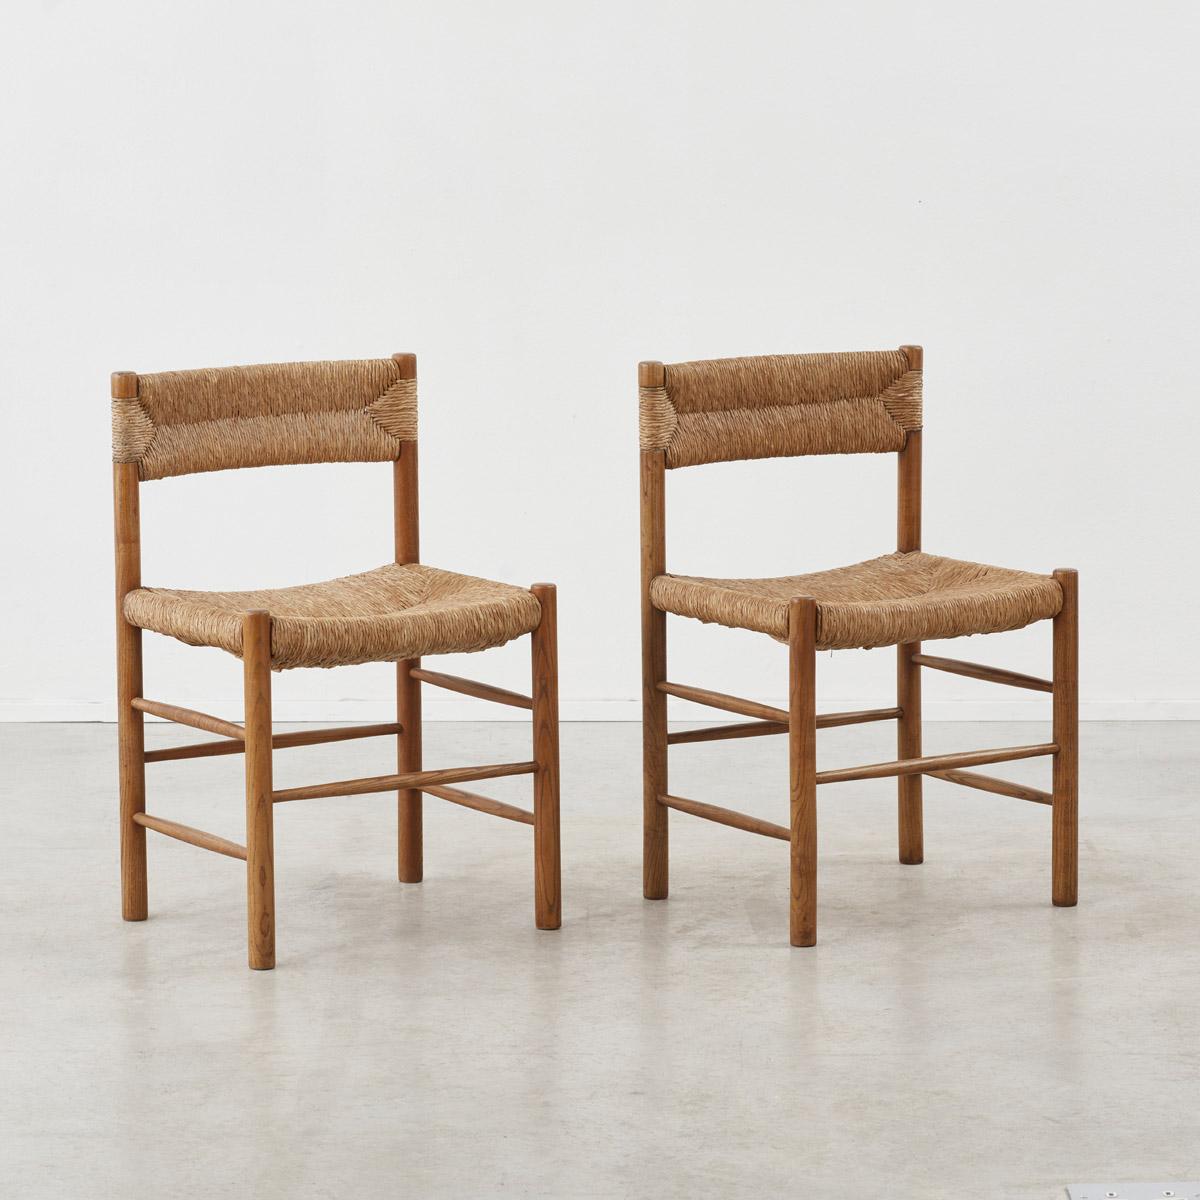 French Set of Six Charlotte Perriand Dordogne Chairs for Robert Sentou, France c1950 For Sale